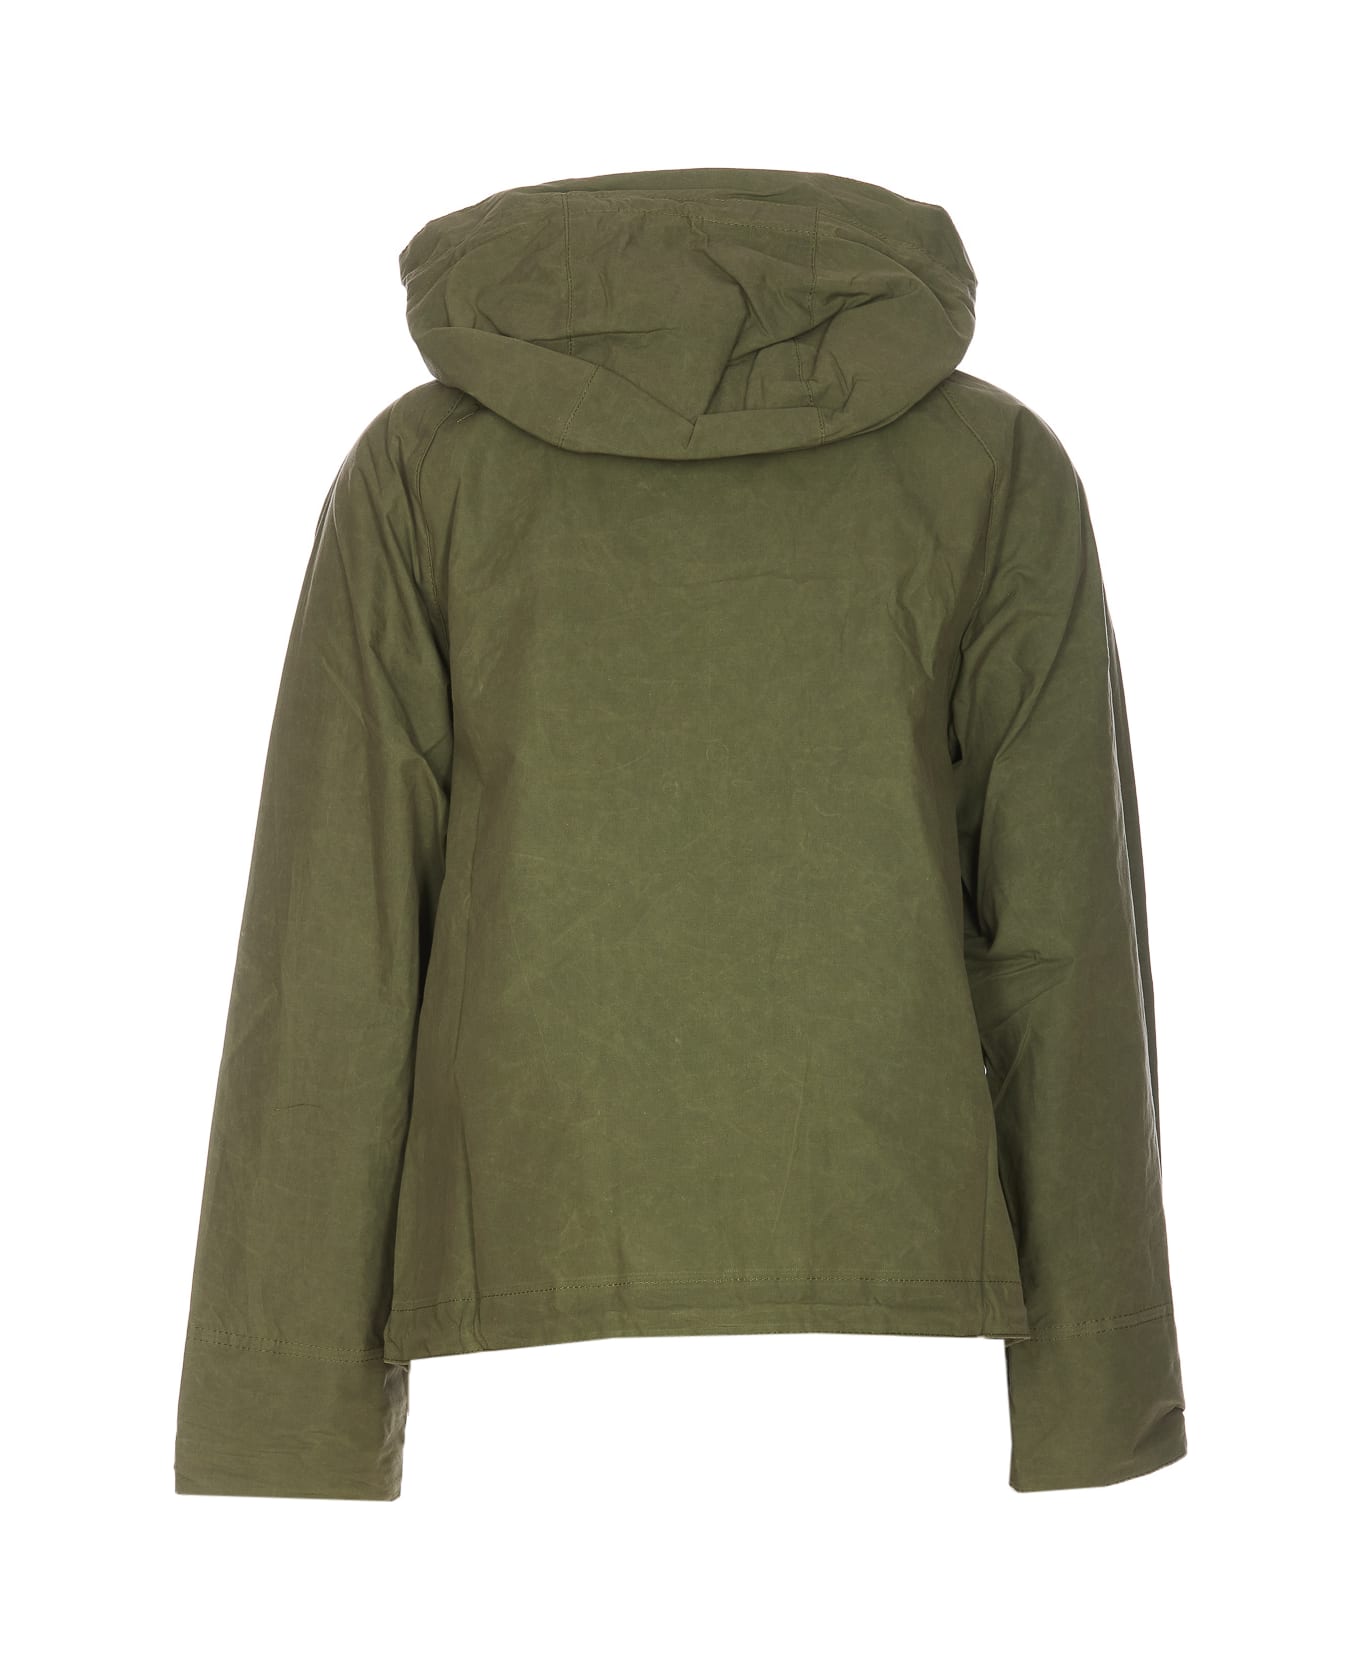 Barbour Nith Jacket - Green